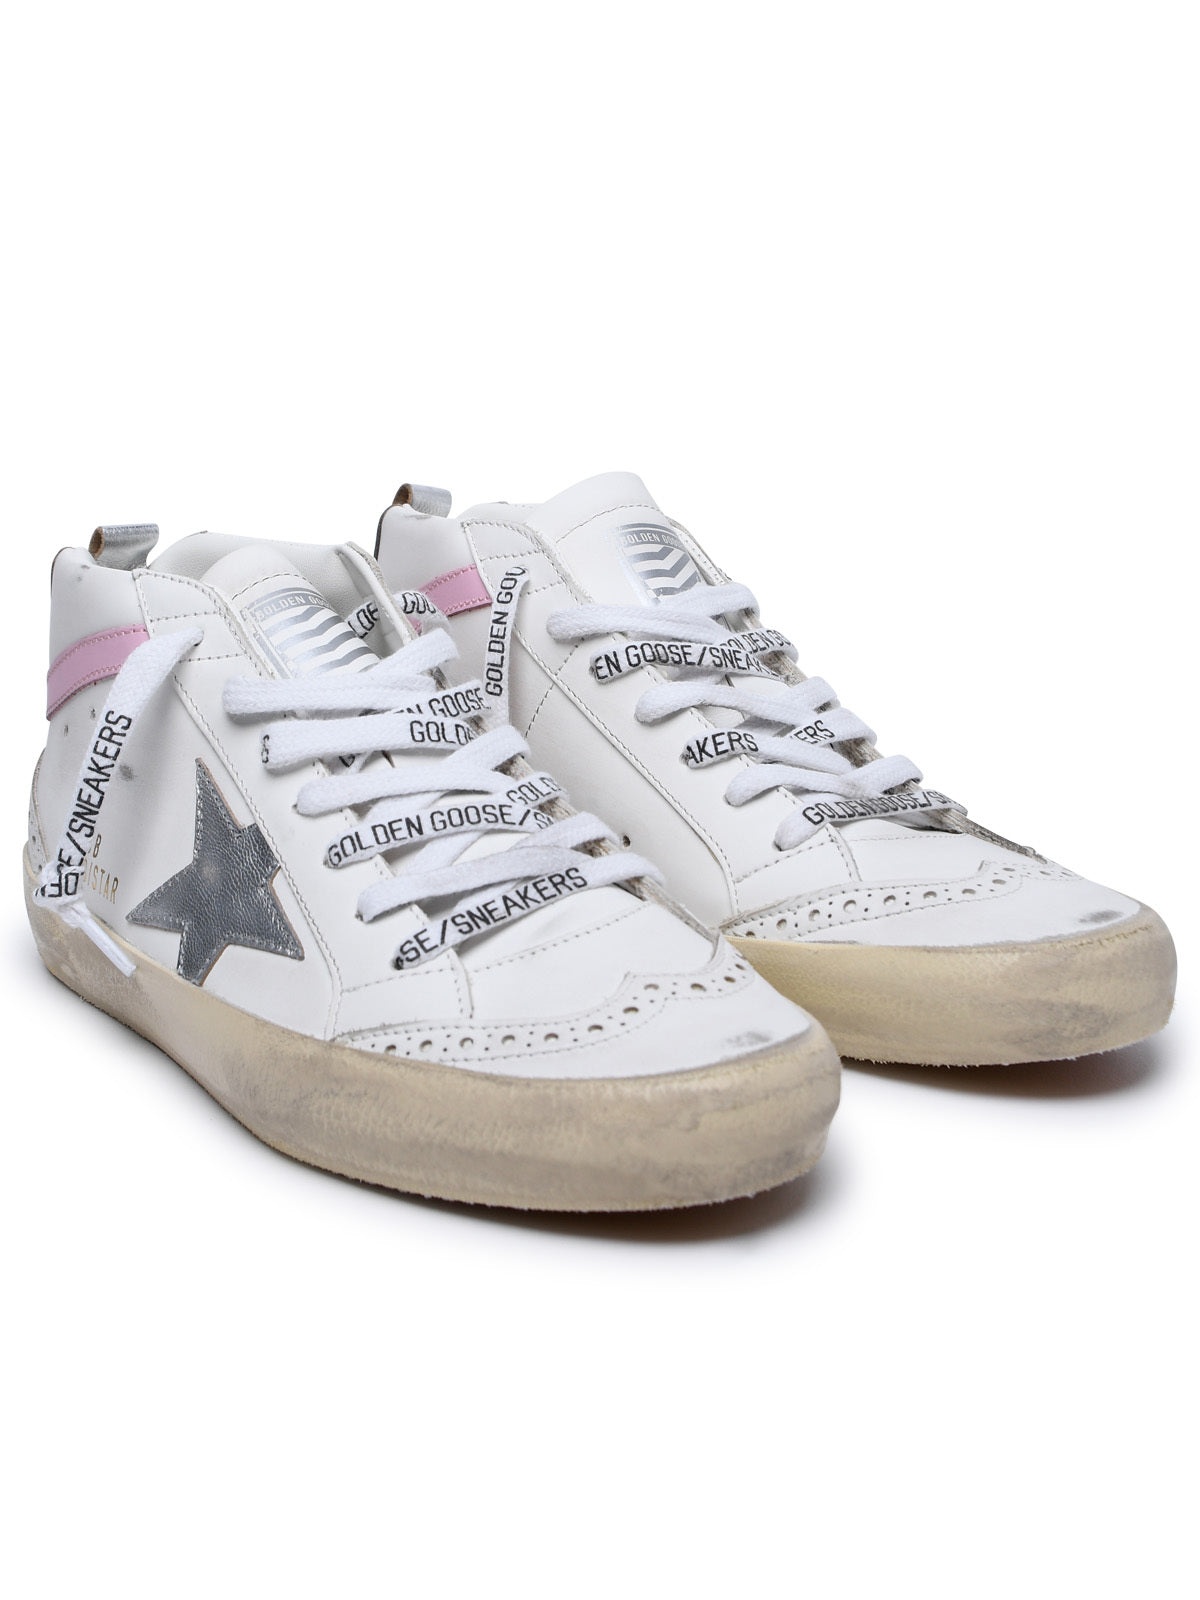 Golden Goose Woman Golden Goose 'Mid Star' White Leather Sneakers - 2